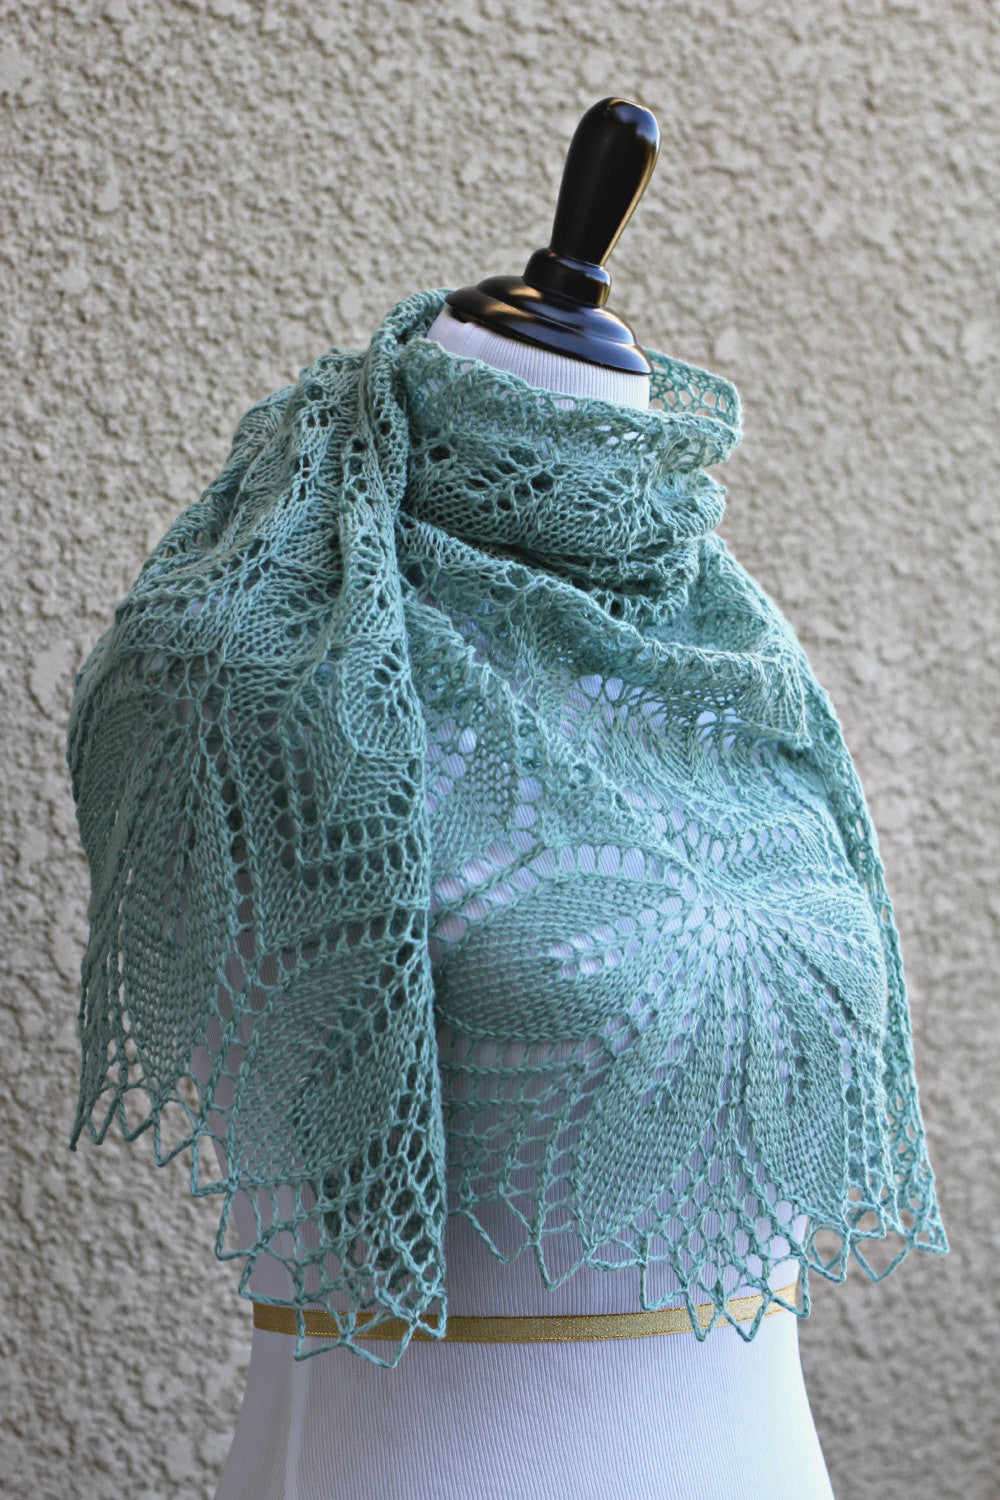 Laced shawl in grey olive color